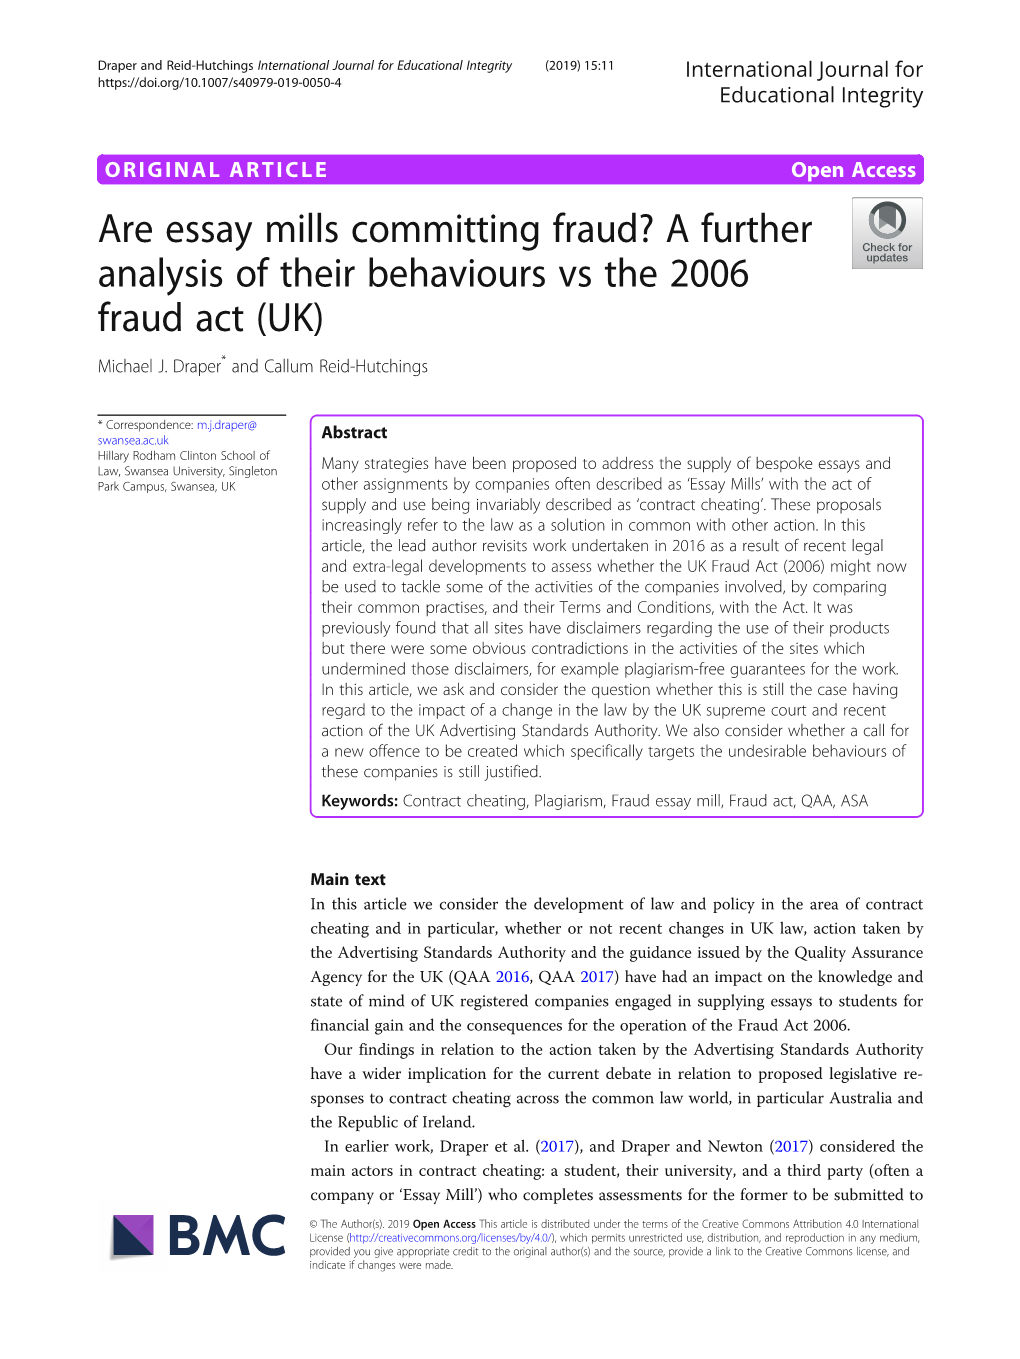 A Further Analysis of Their Behaviours Vs the 2006 Fraud Act (UK) Michael J